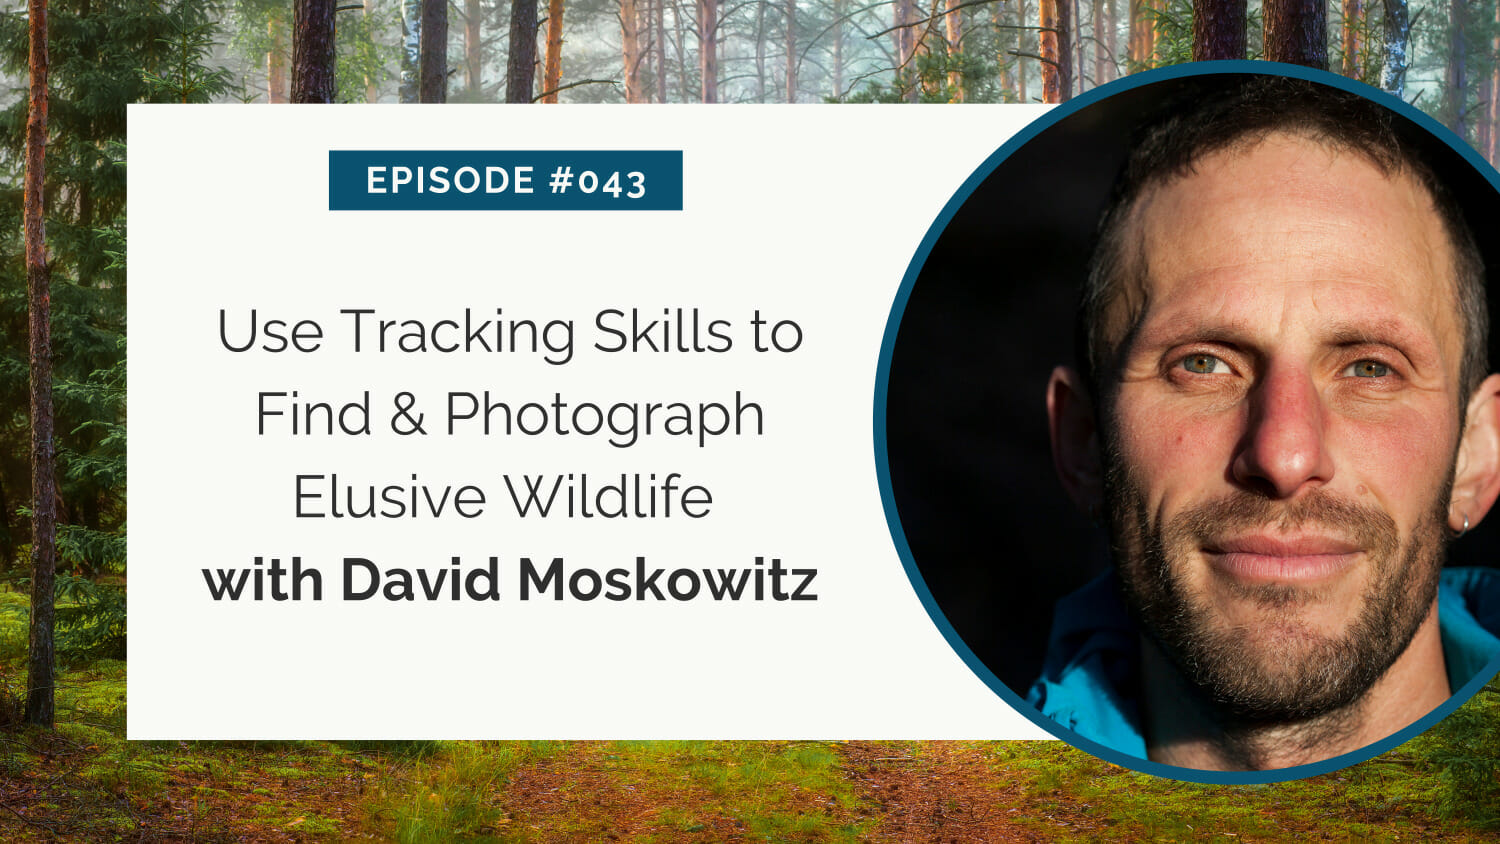 Podcast episode graphic featuring guest david moskowitz on the topic of using tracking skills to locate and photograph elusive wildlife.